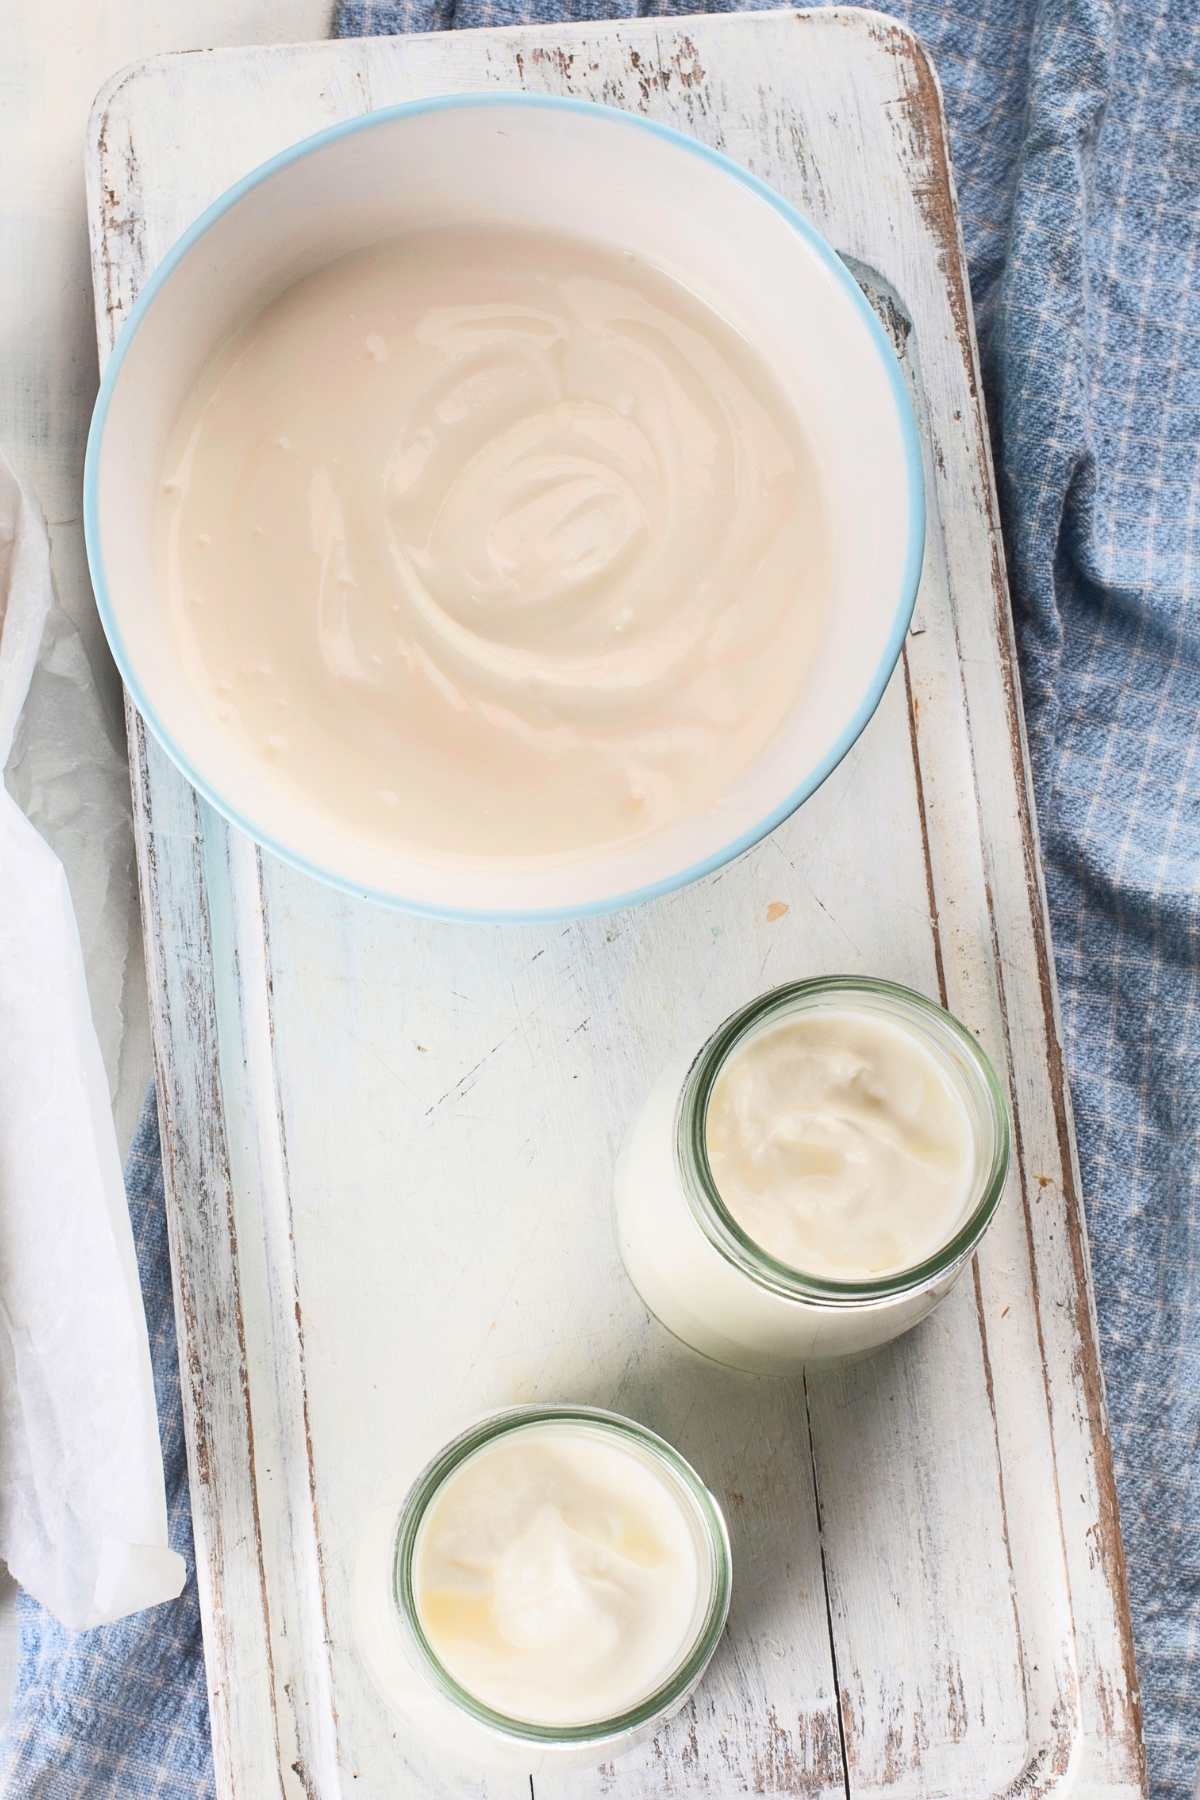 Now you can make Mexican Crema at home! It’s thick, creamy, and full of tangy flavor.